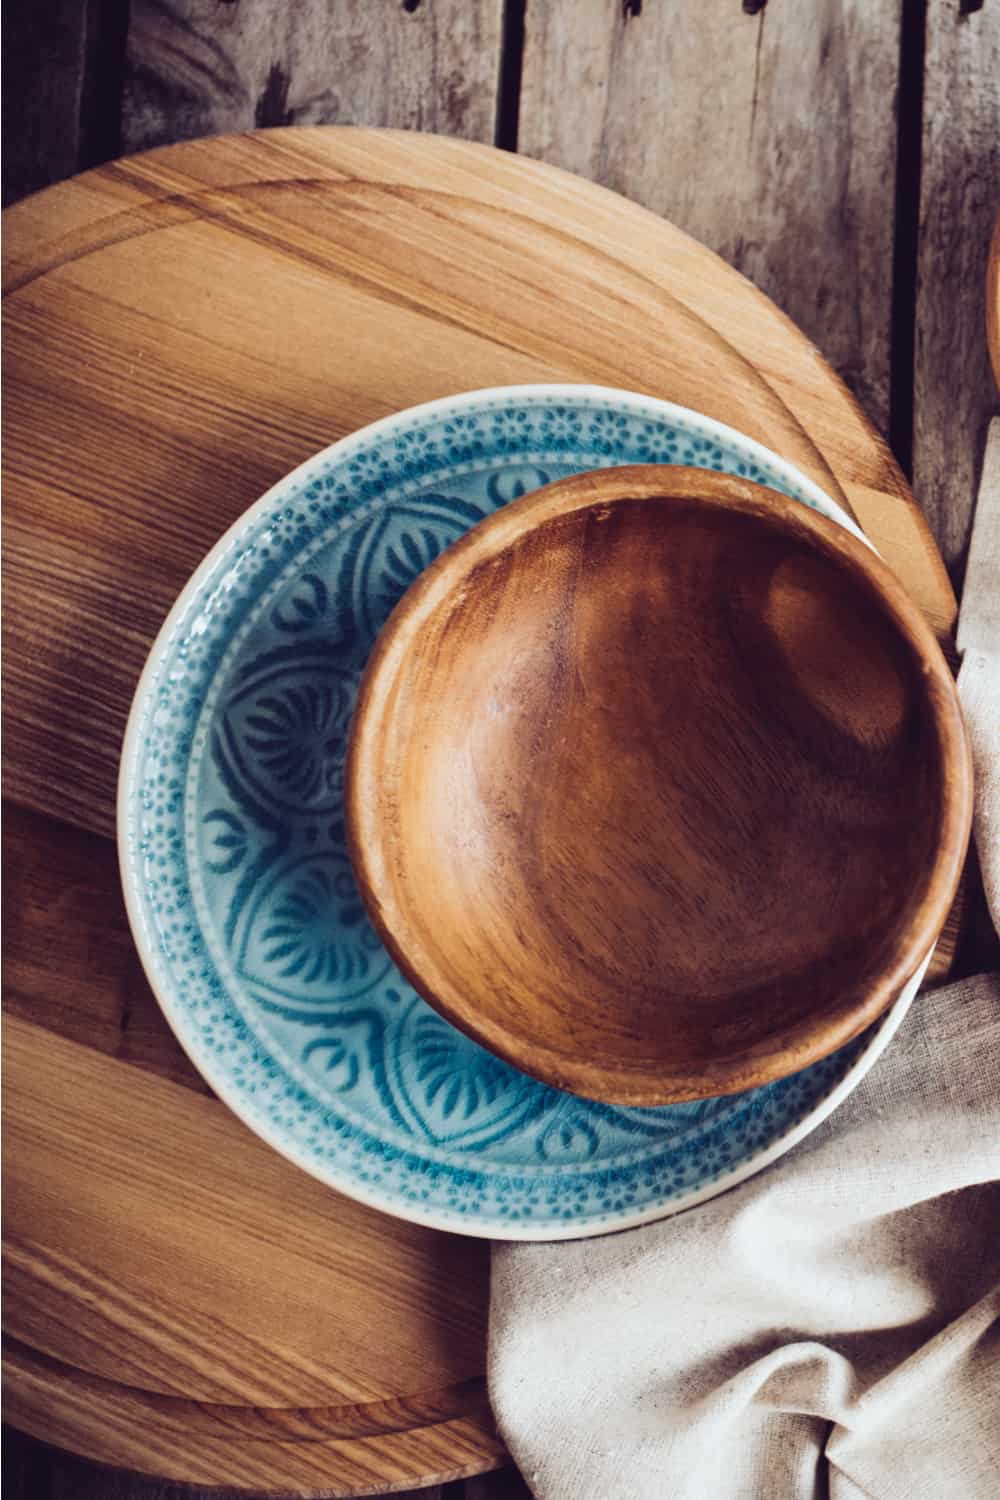 19 Homemade Wooden Bowl Plans You Can DIY Easily